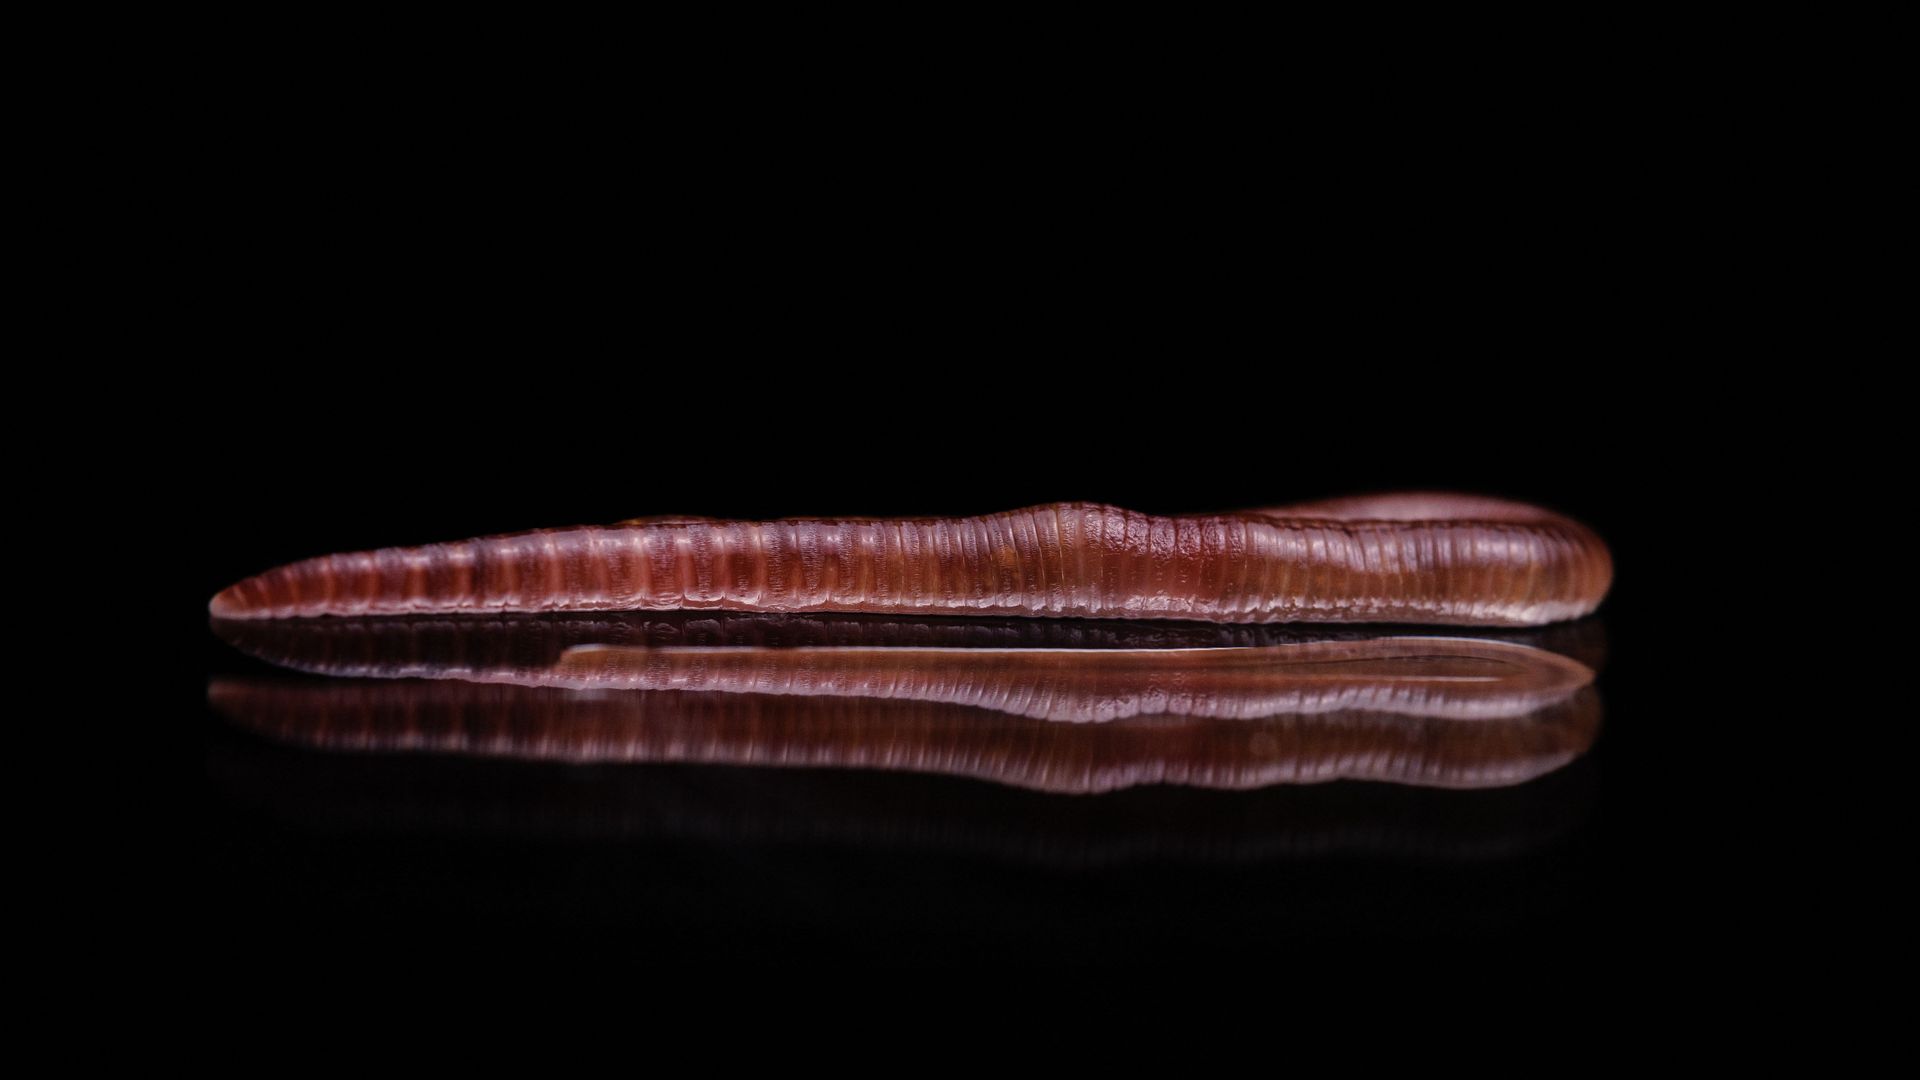 An Eisenia fetida, commonly known as an earthworm is pictured in Paris on March 1, 2023. (Photo by Joël SAGET / AFP) (Photo by JOEL SAGET/AFP via Getty Images)